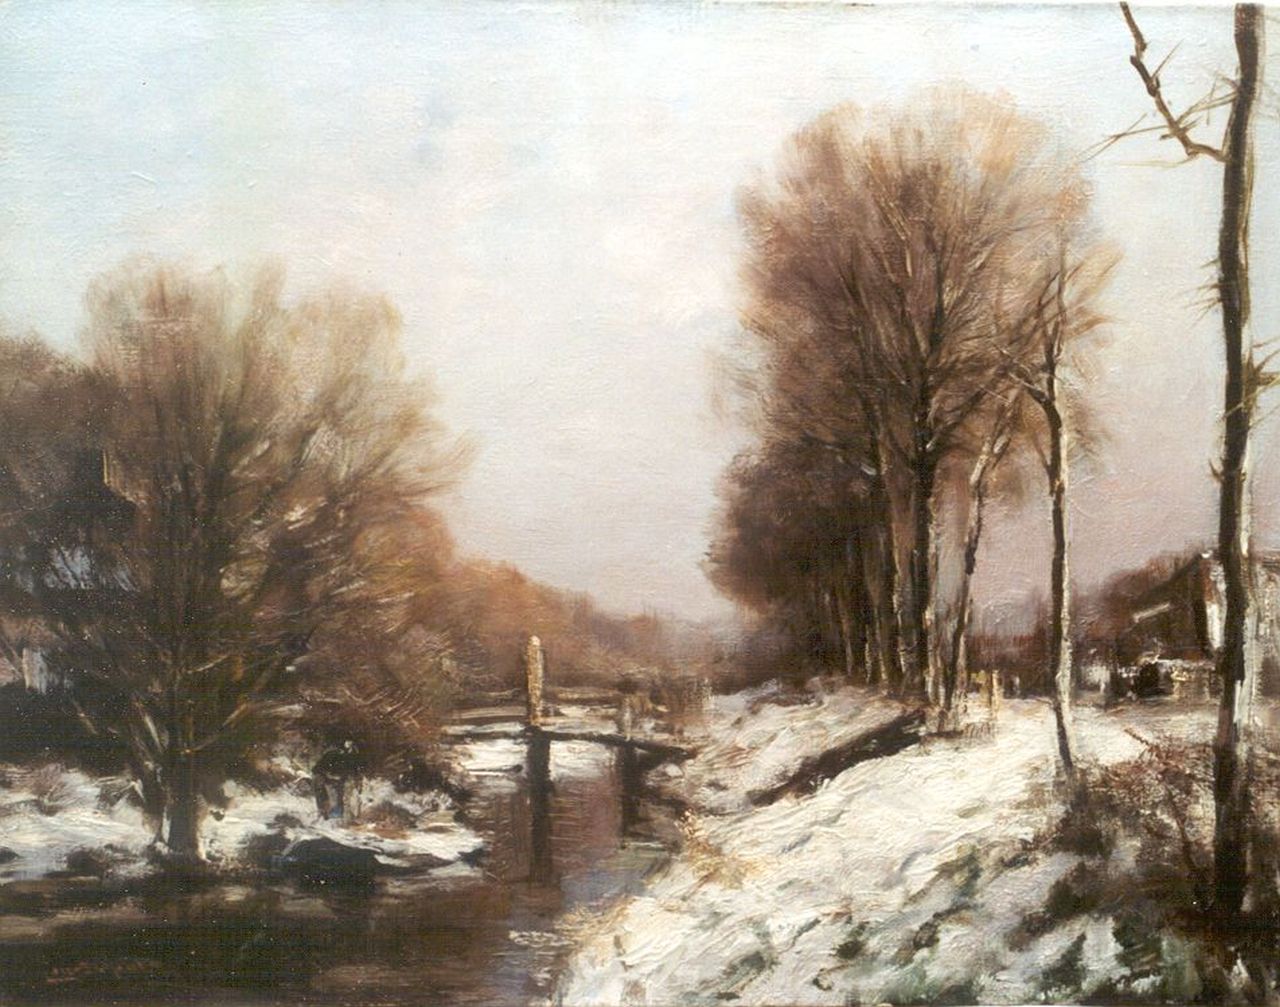 Apol L.F.H.  | Lodewijk Franciscus Hendrik 'Louis' Apol, A view of a draw-bridge in winter, oil on canvas 39.1 x 50.0 cm, signed l.l.